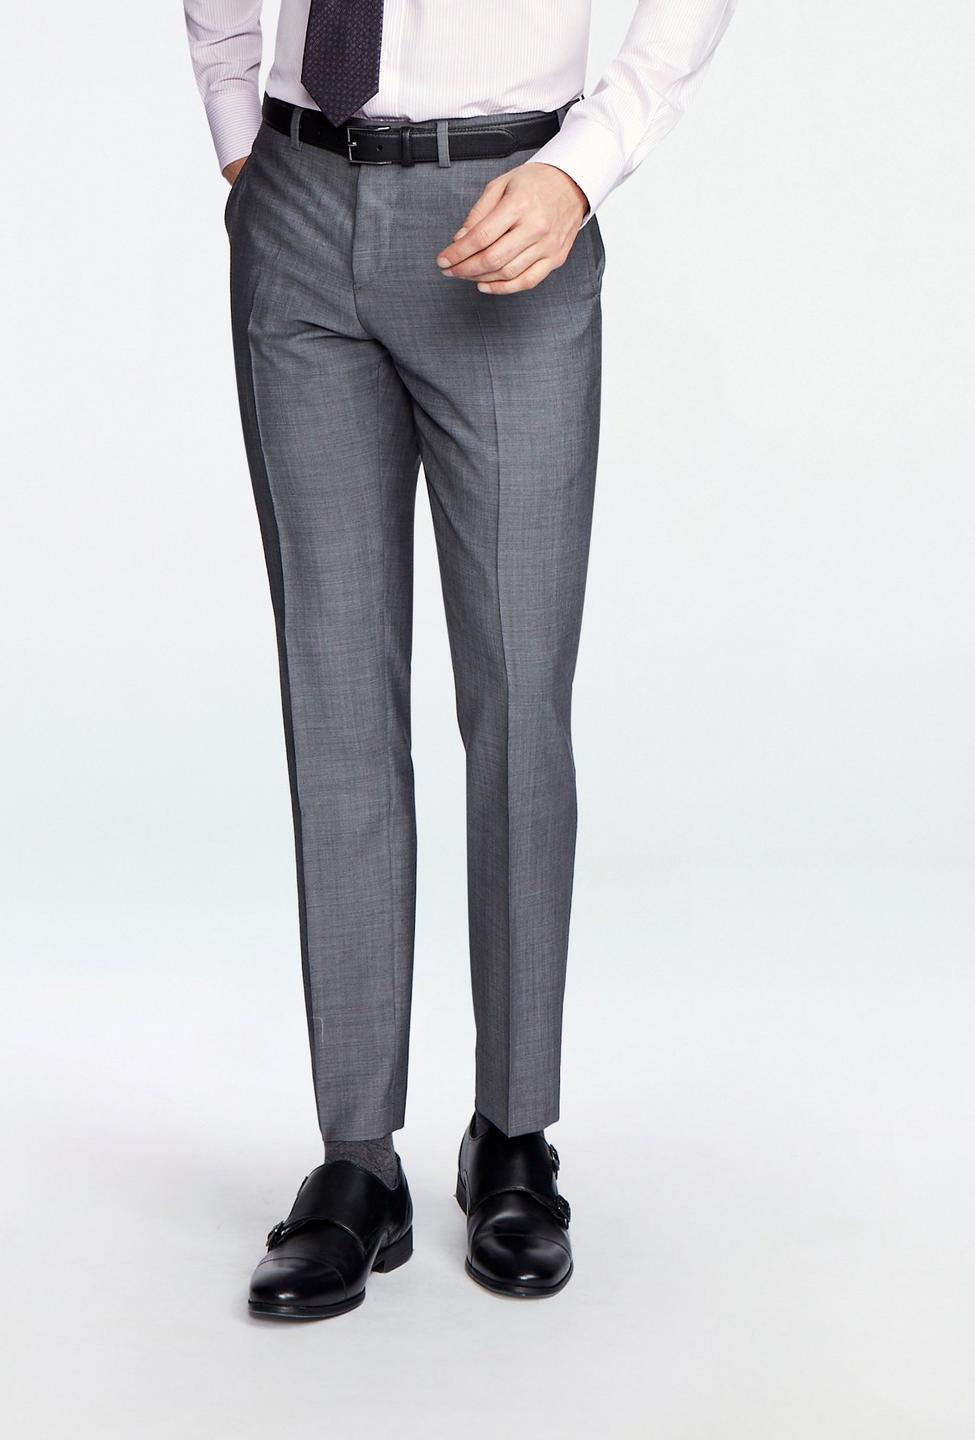 Gray pants - Hamilton Solid Design from Luxury Indochino Collection